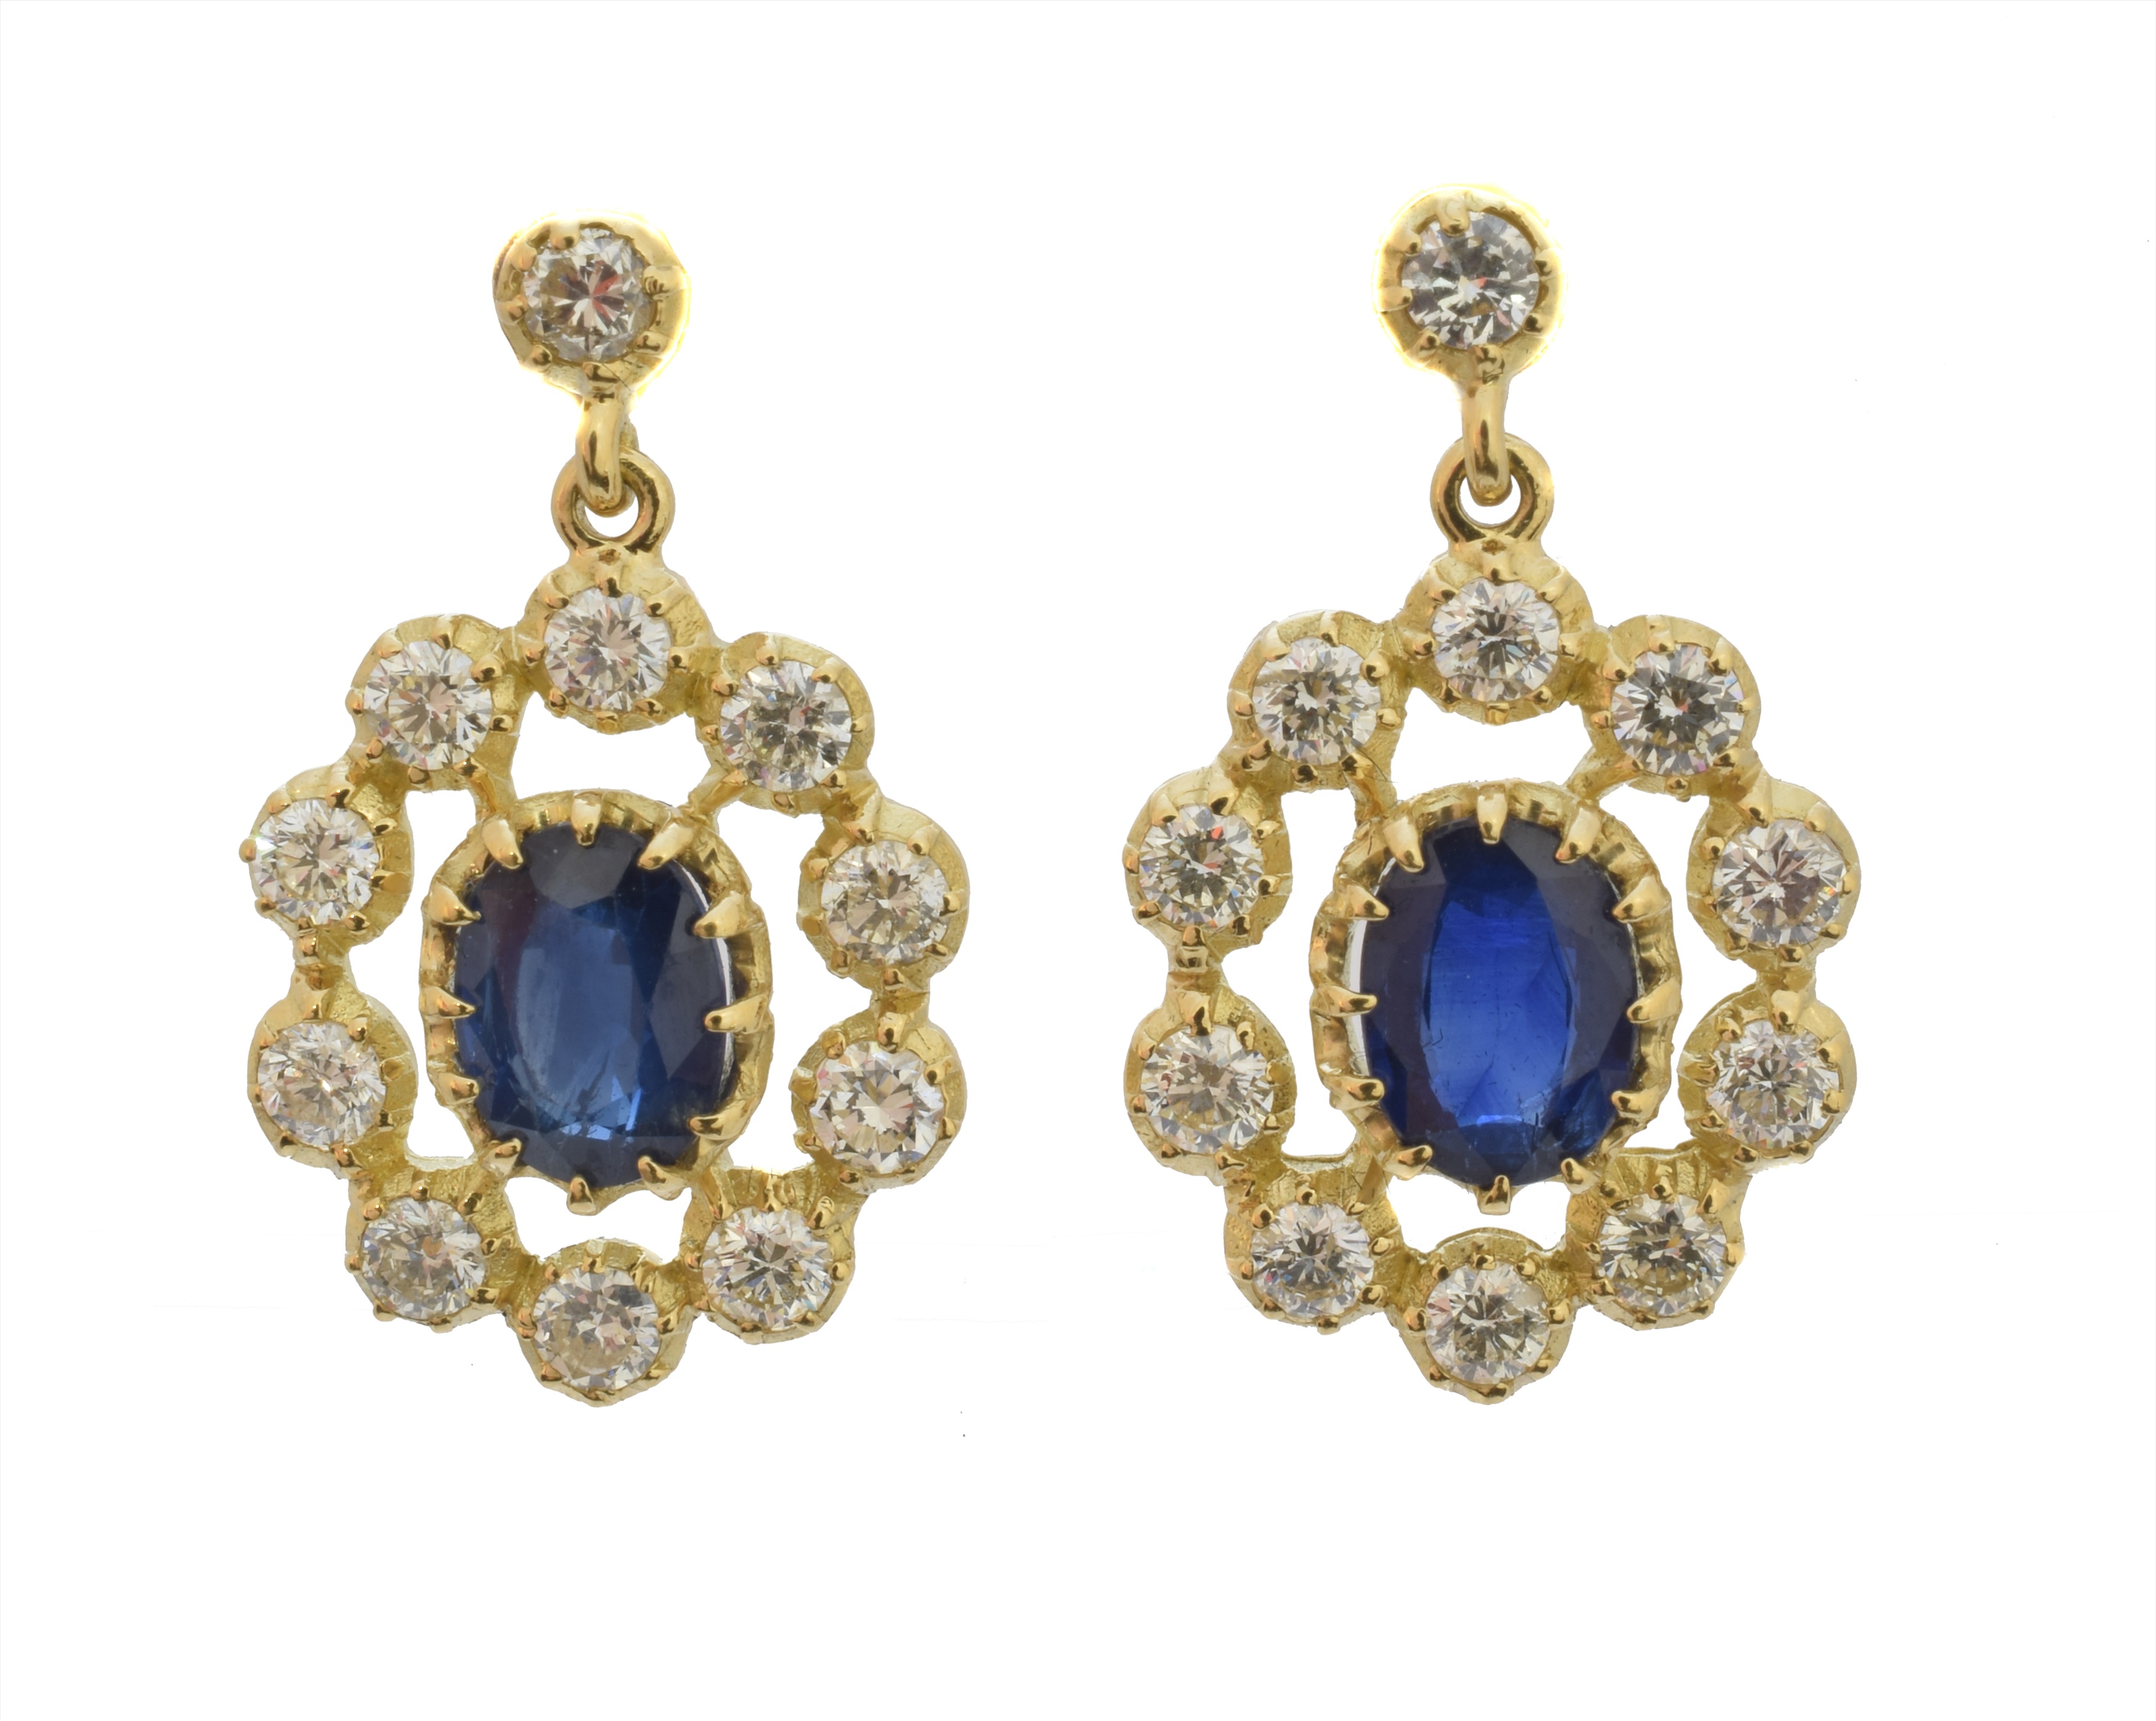 A pair of sapphire and diamond earrings, each designed as an oval shape sapphire within a brilliant cut diamond openwork surround, suspended from a similarly cut diamond surmount, stamped 750, estimated total diamond weight 1.35cts, length 2.3cm, gross weight 5.6g.